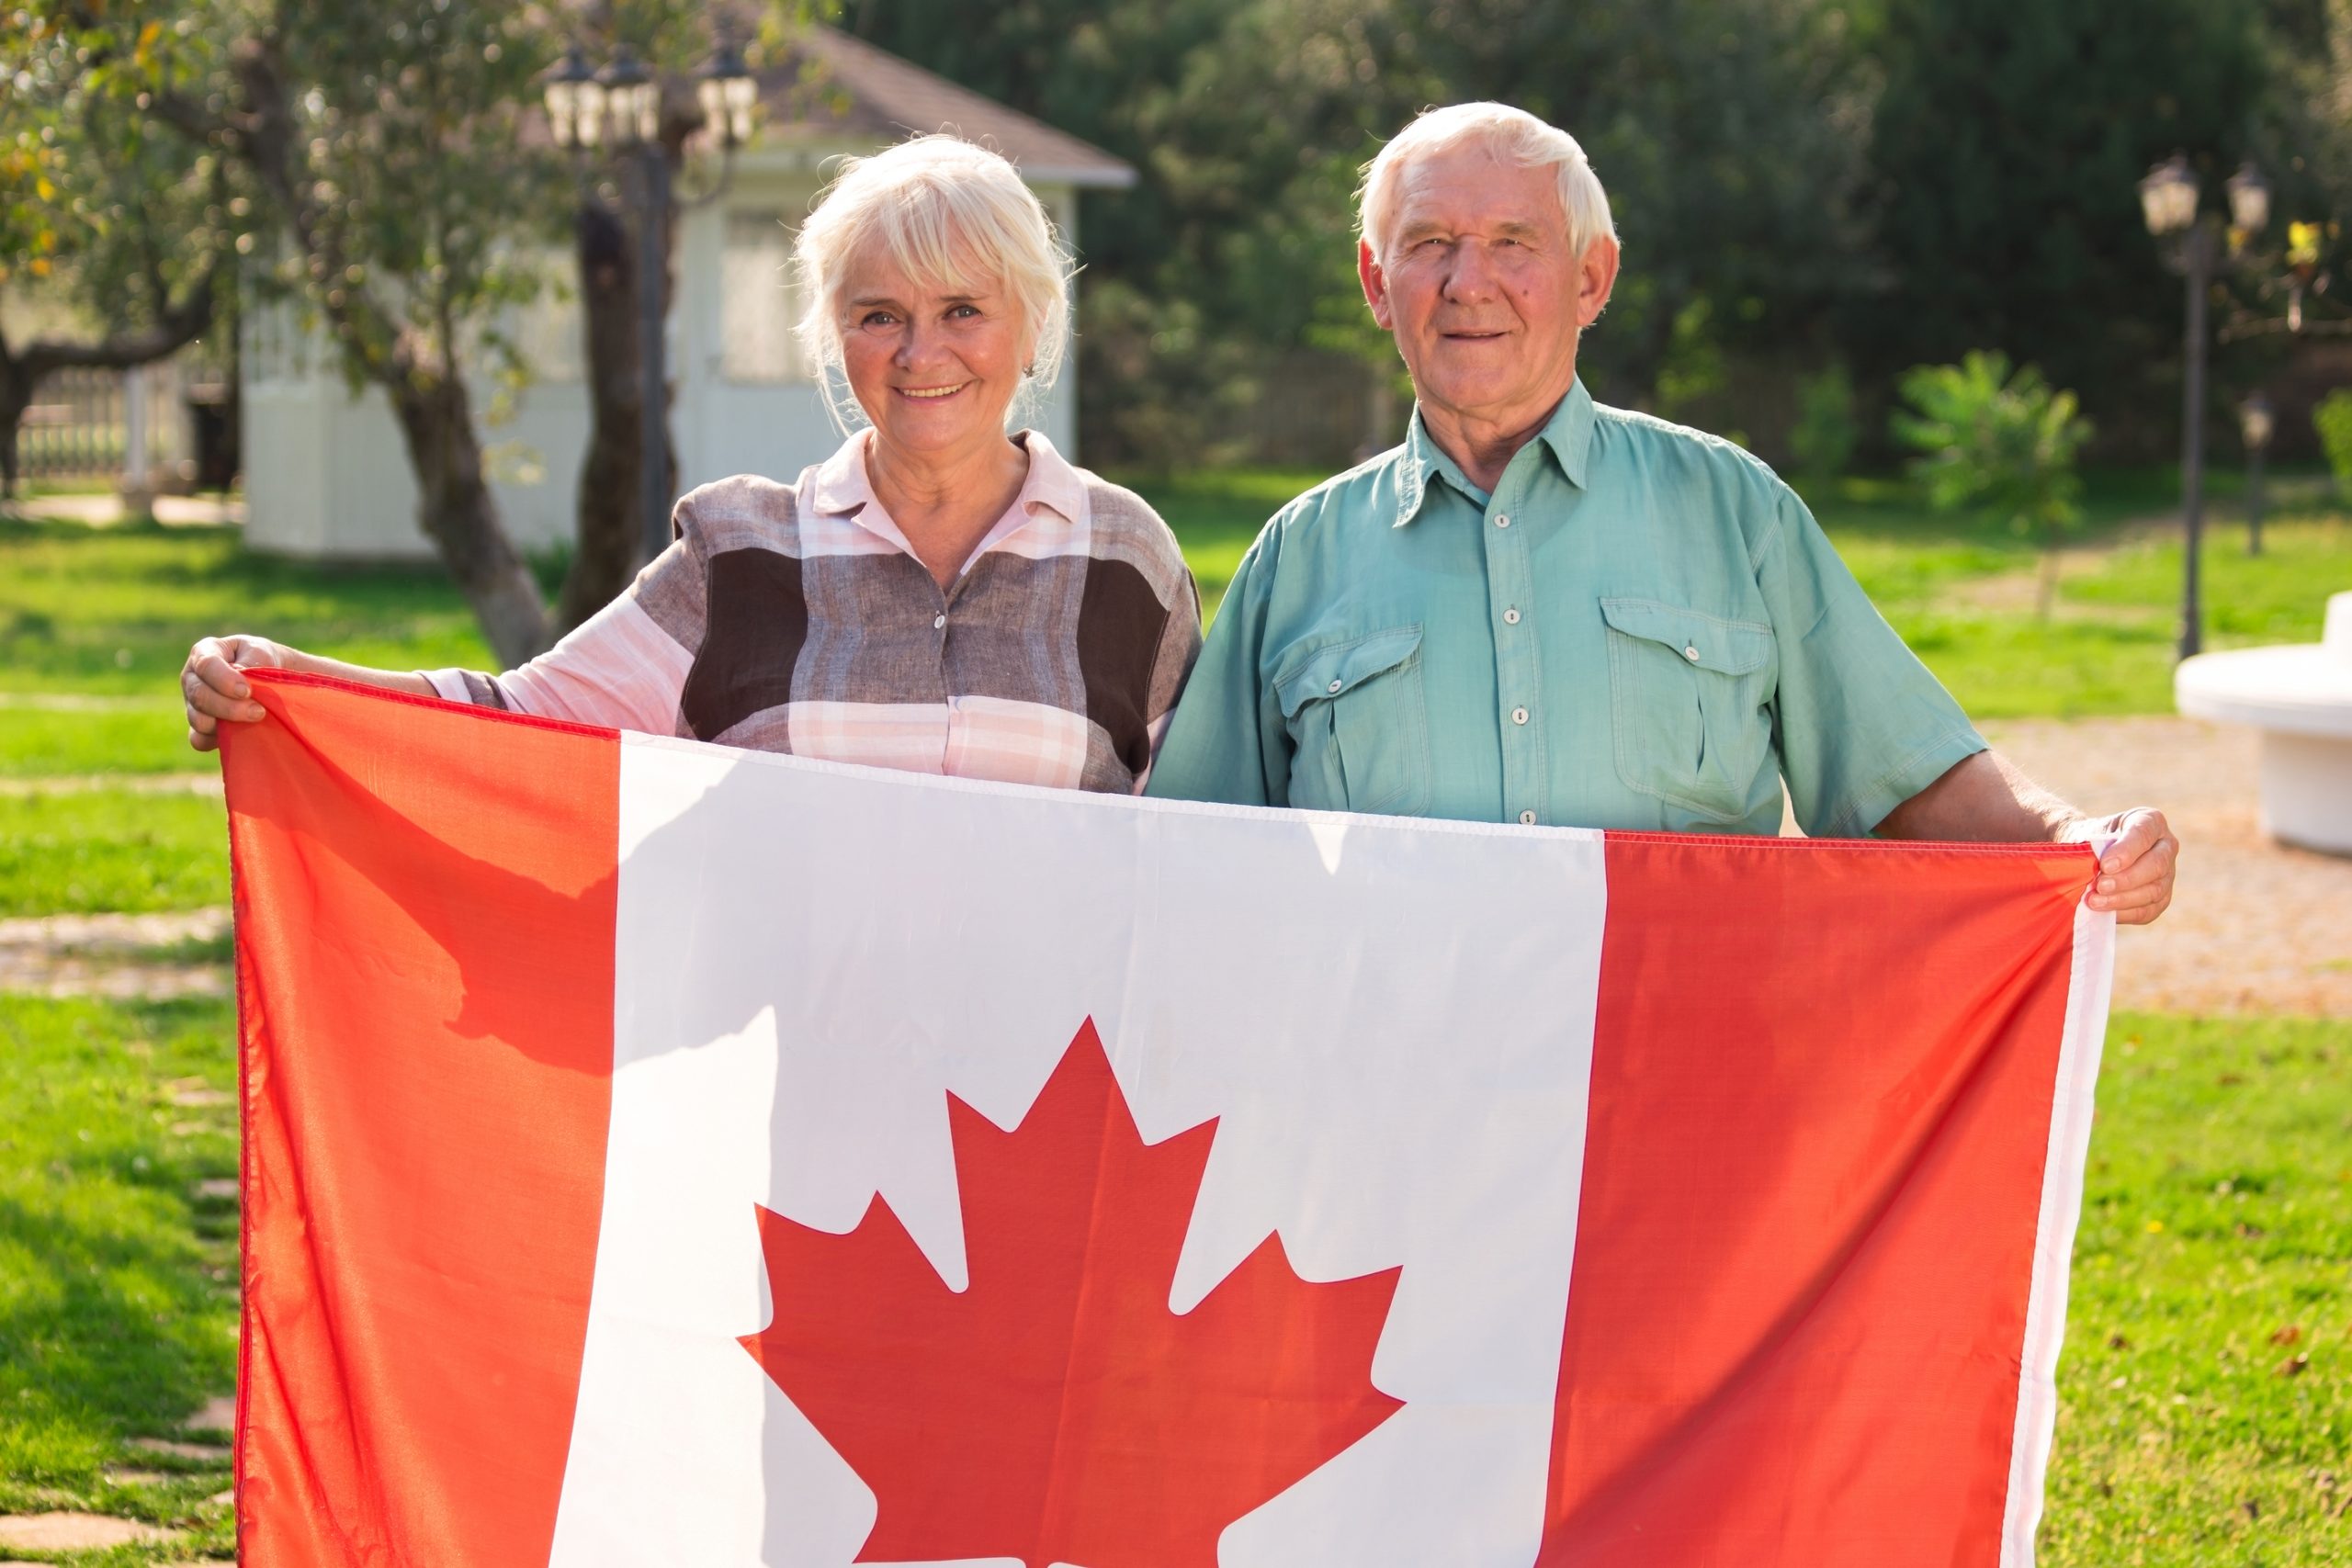 SLM How Do Seniors in Canada Spend Their Time?